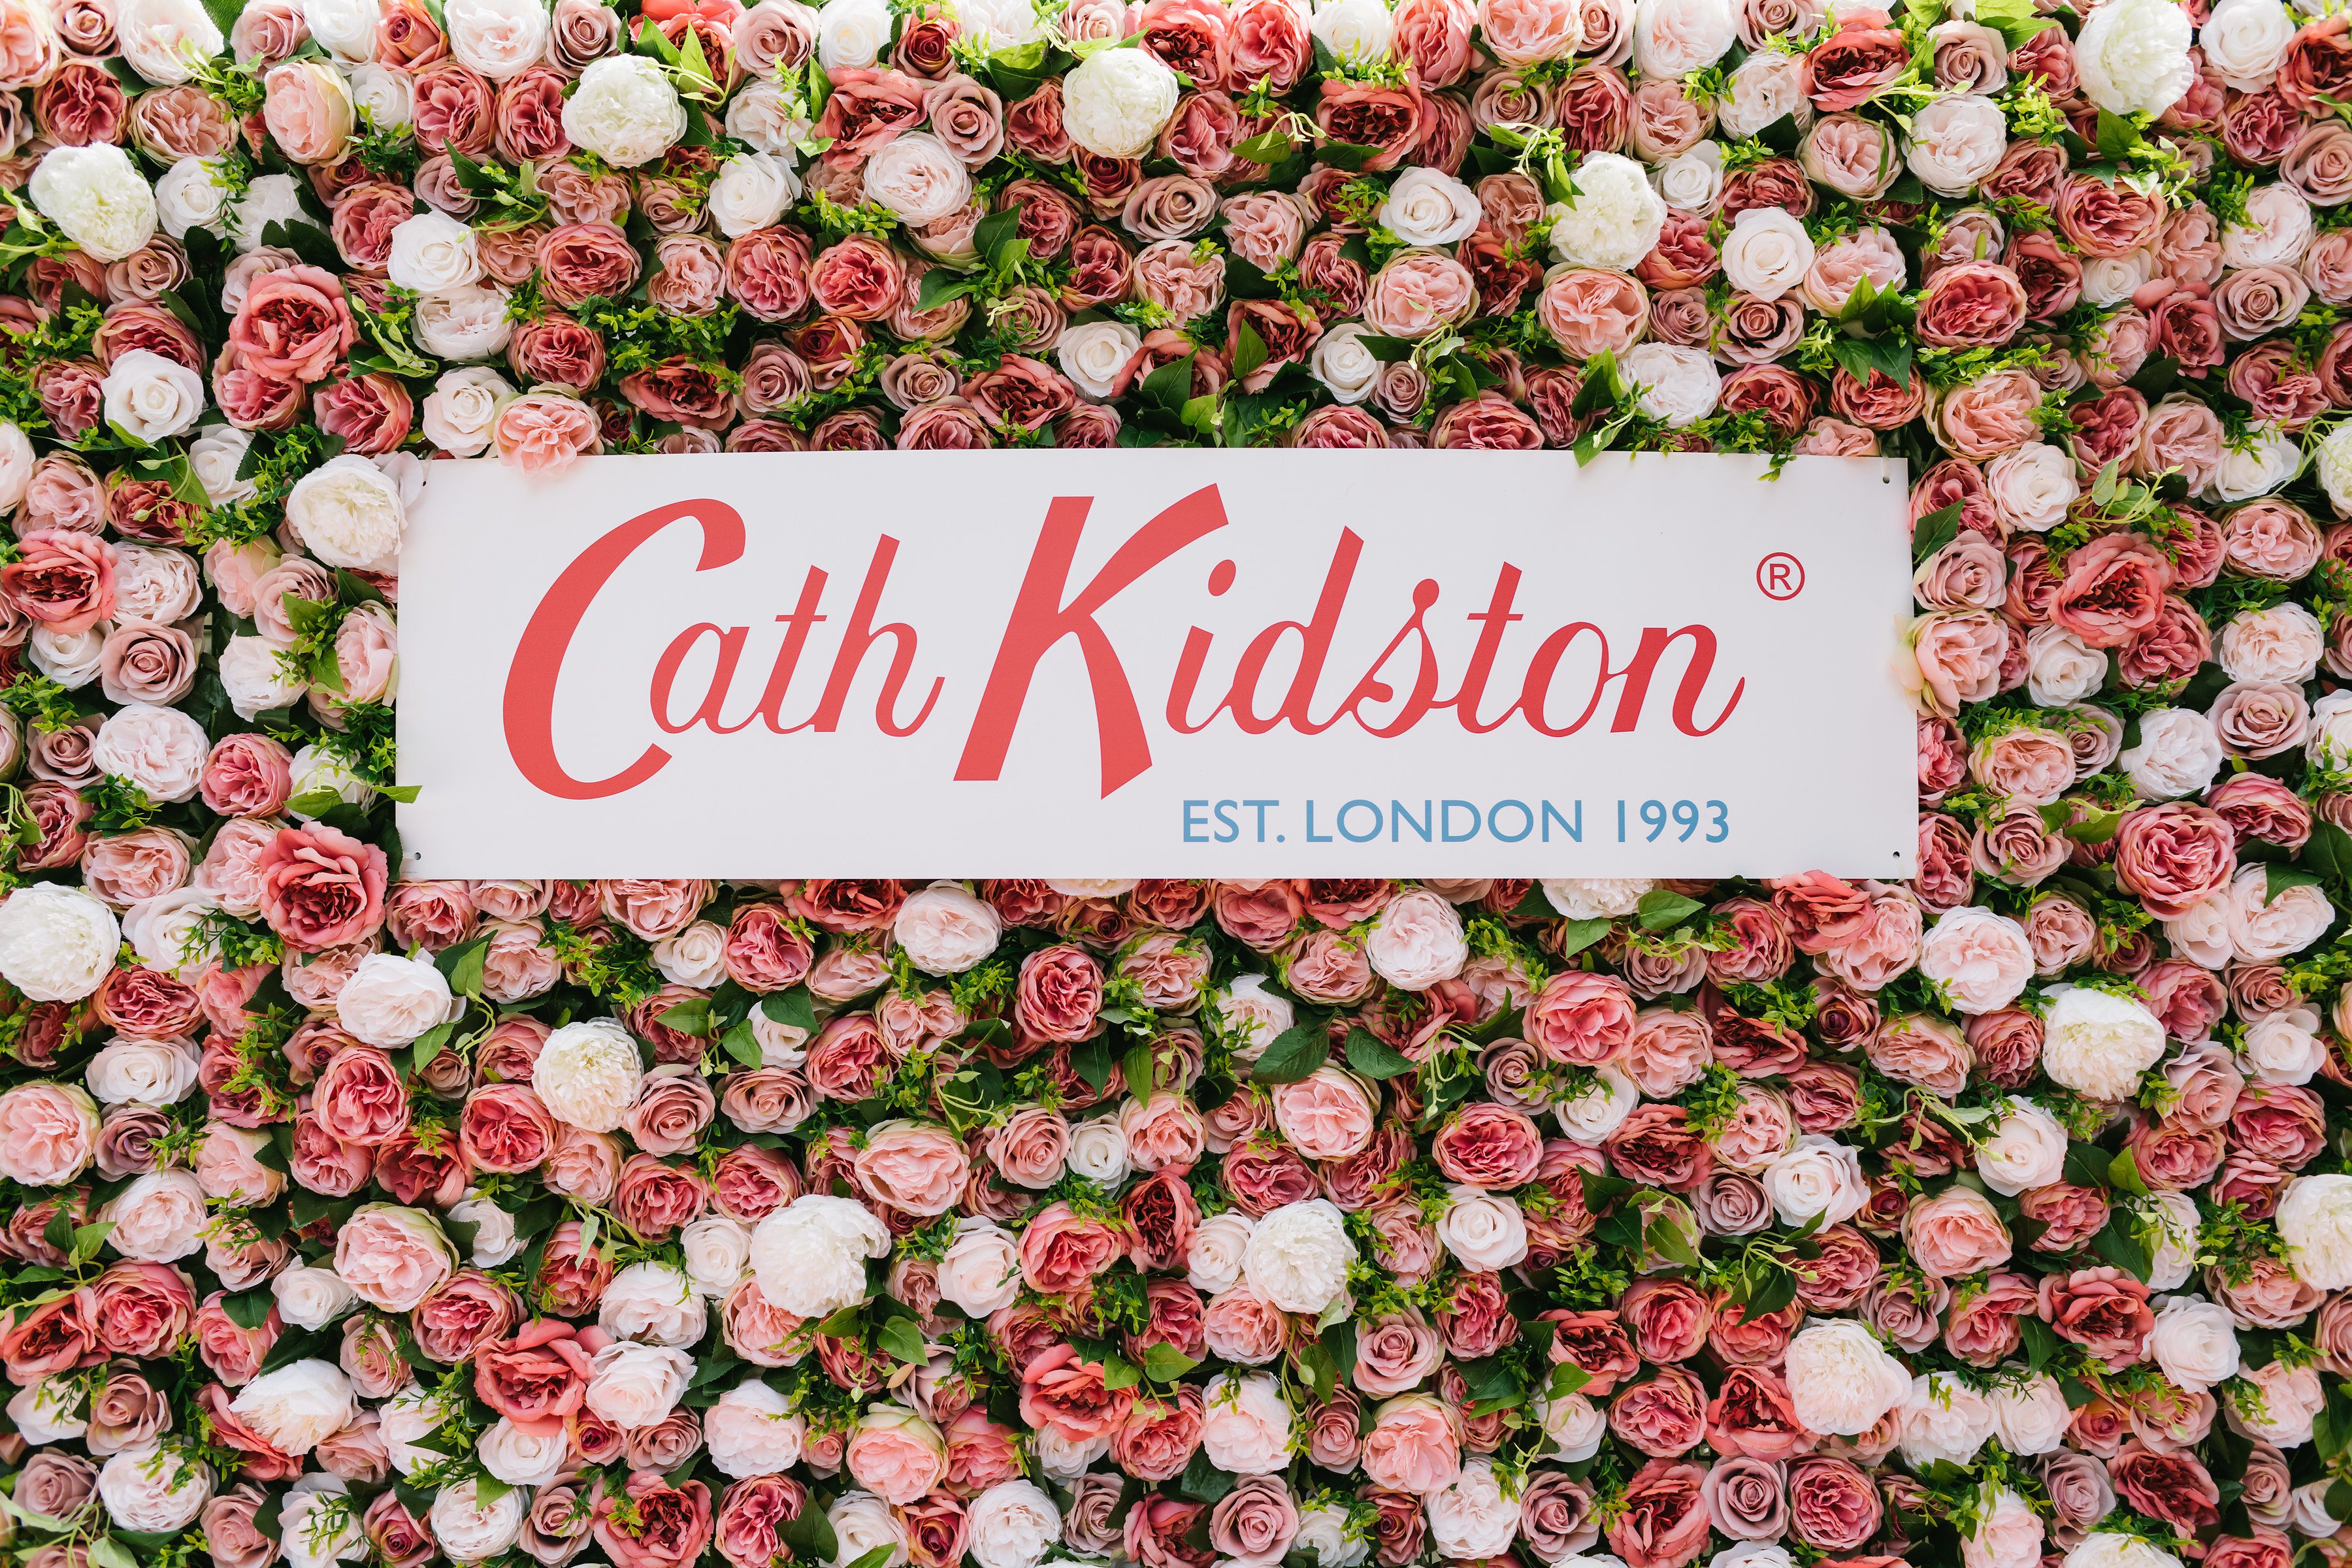 about cath kidston